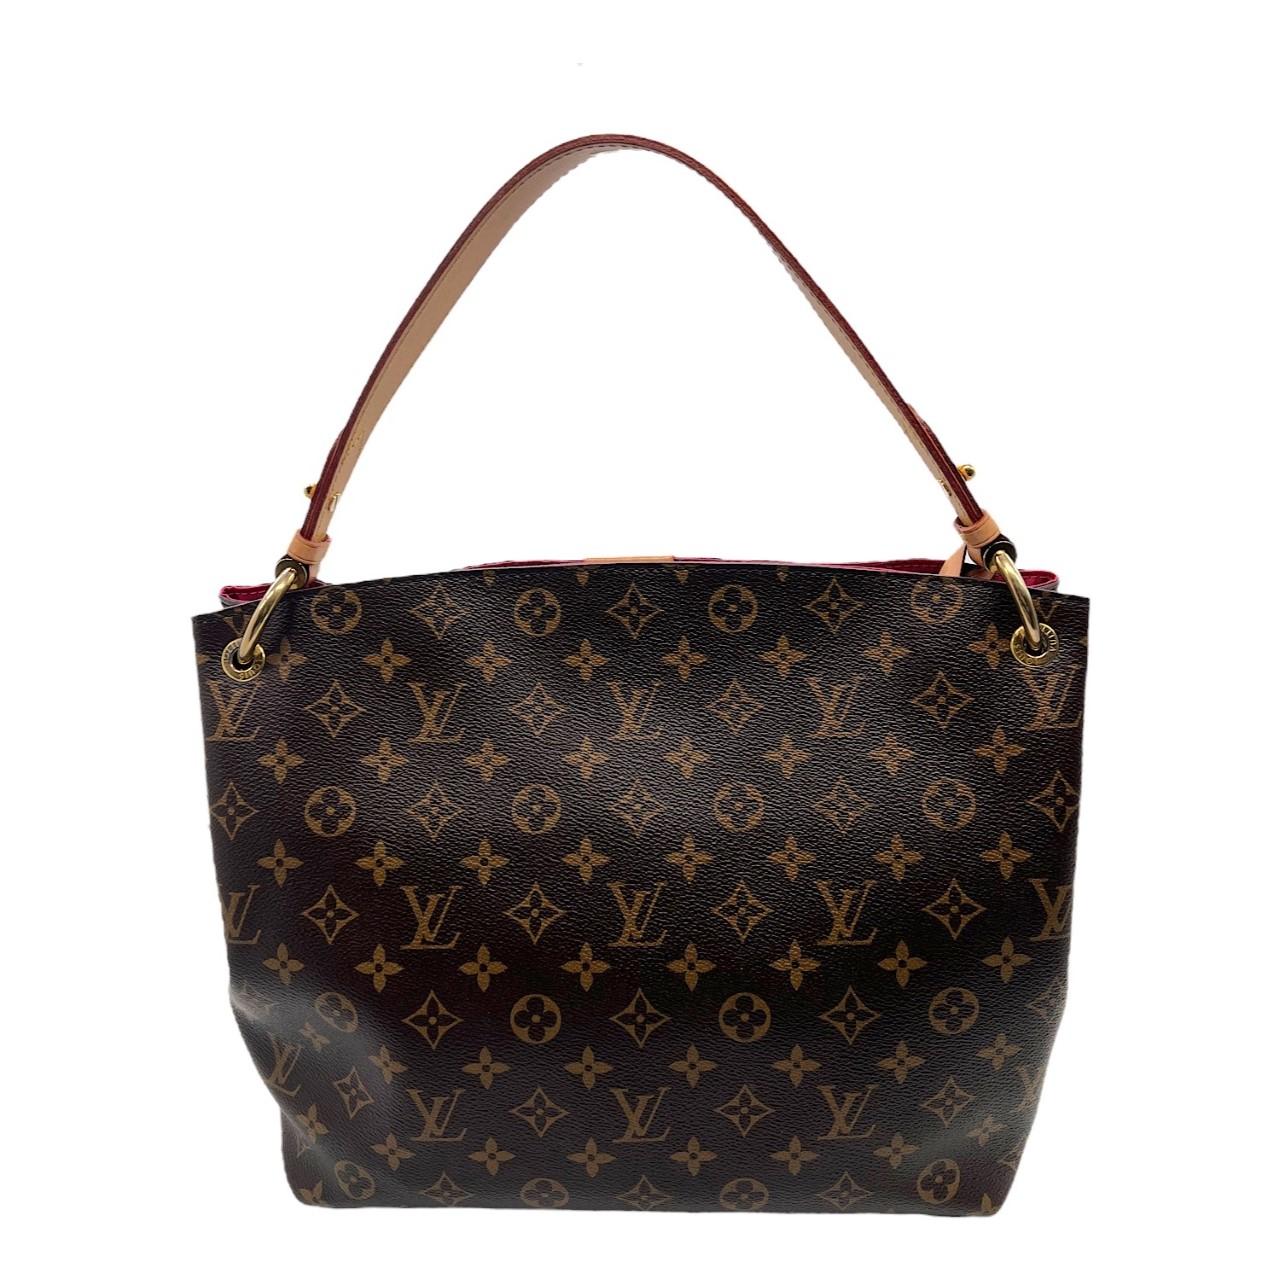 We are offering this beautiful Louis Vuitton Monogram Graceful PM It is crafted of the classic Louis Vuitton Monogram coated canvas exterior, with a flat leather shoulder handle with brass hardware. It features an open top magnetic leather patch